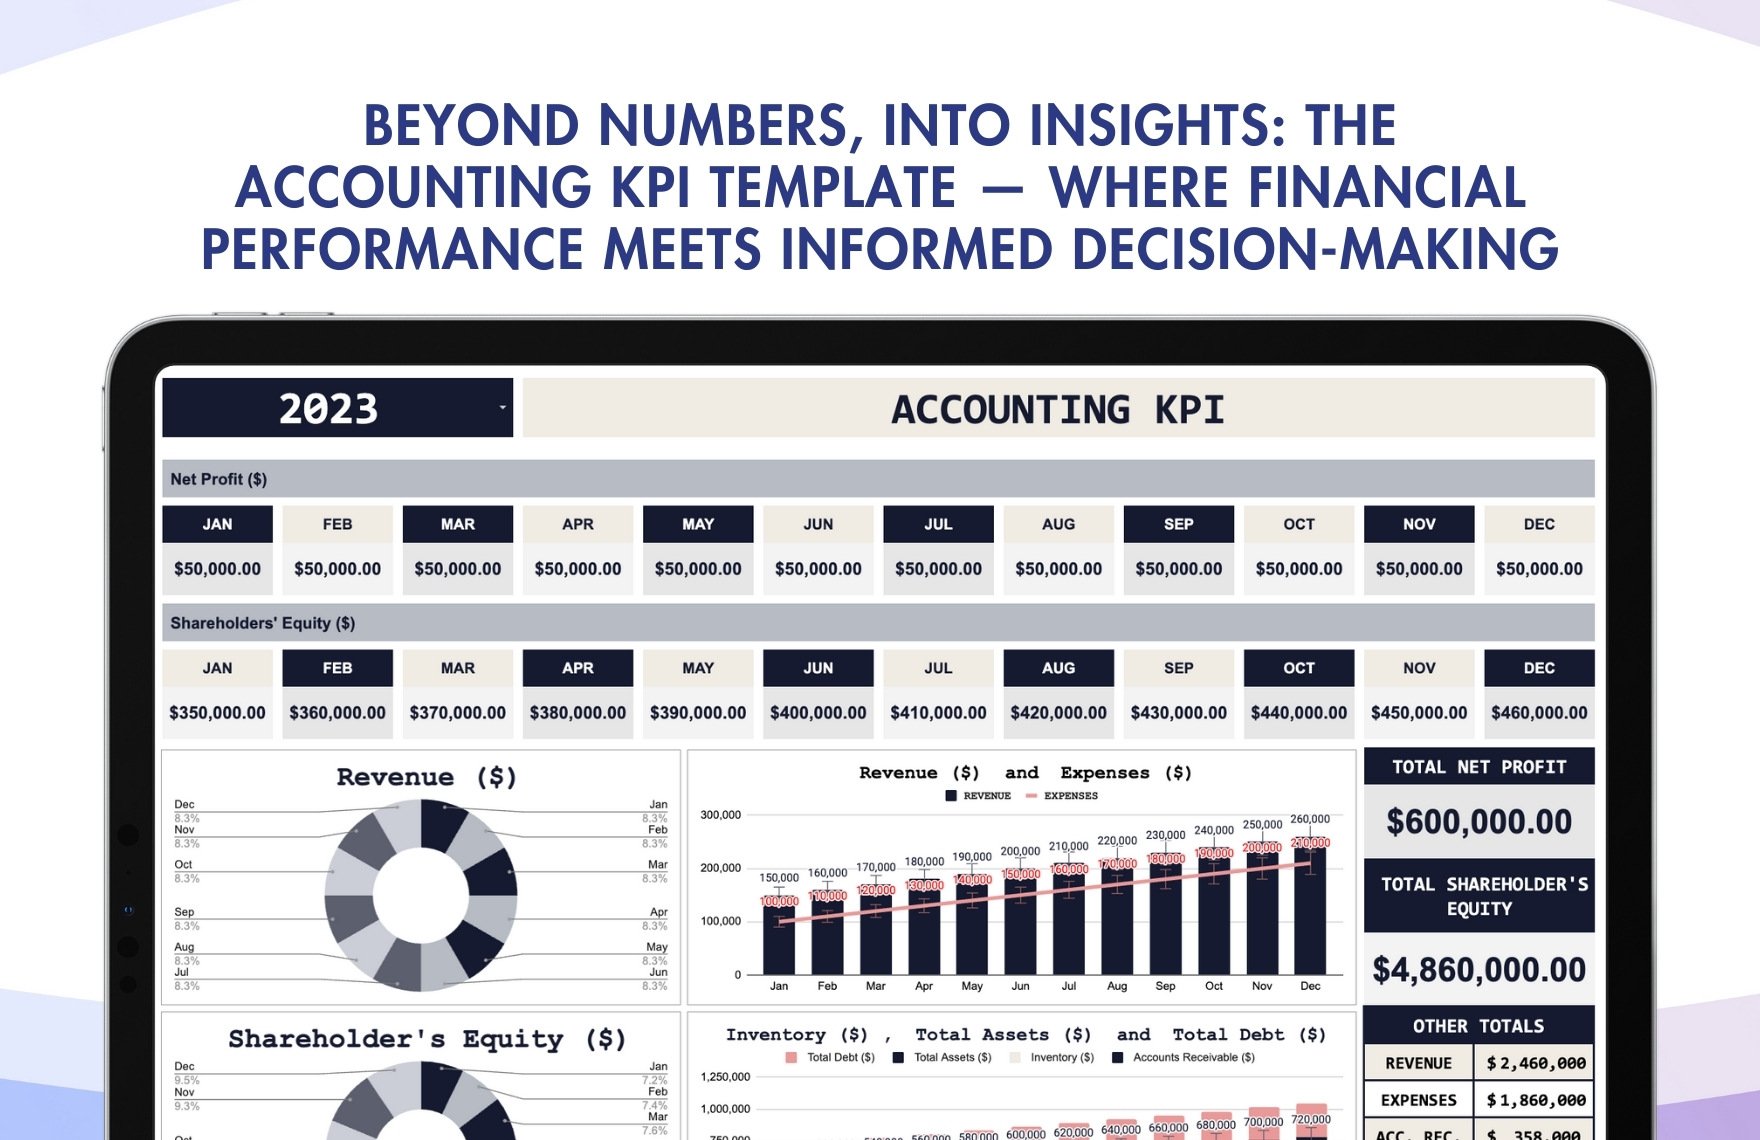 Accounting KPI Template